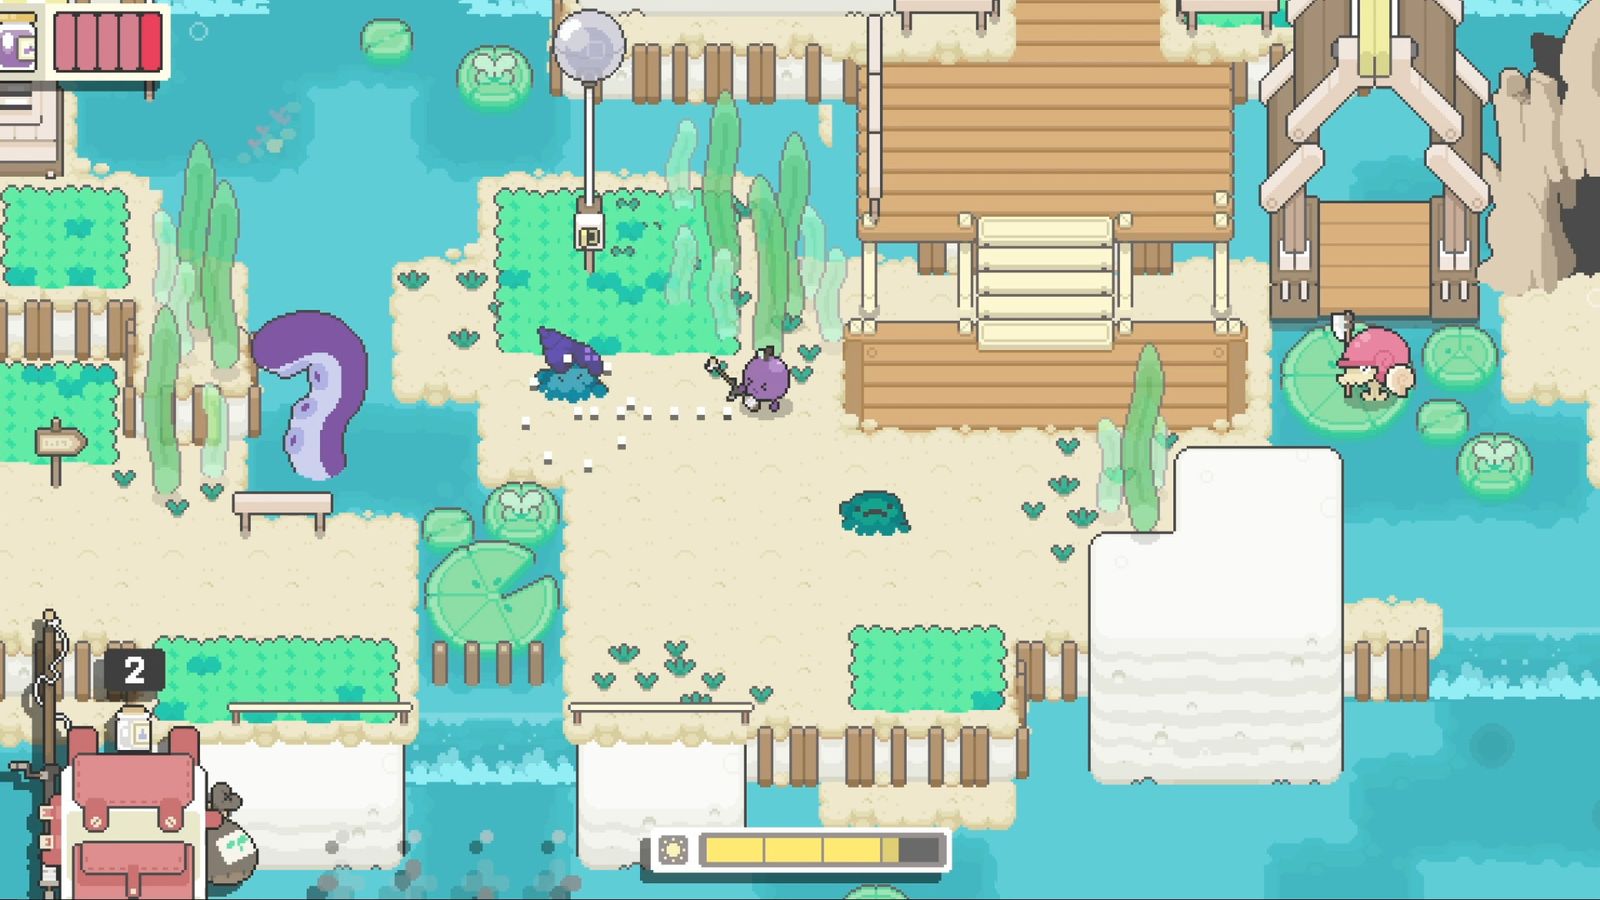 A 2D landscape featuring water, sand, lilypads, and several purple characters.